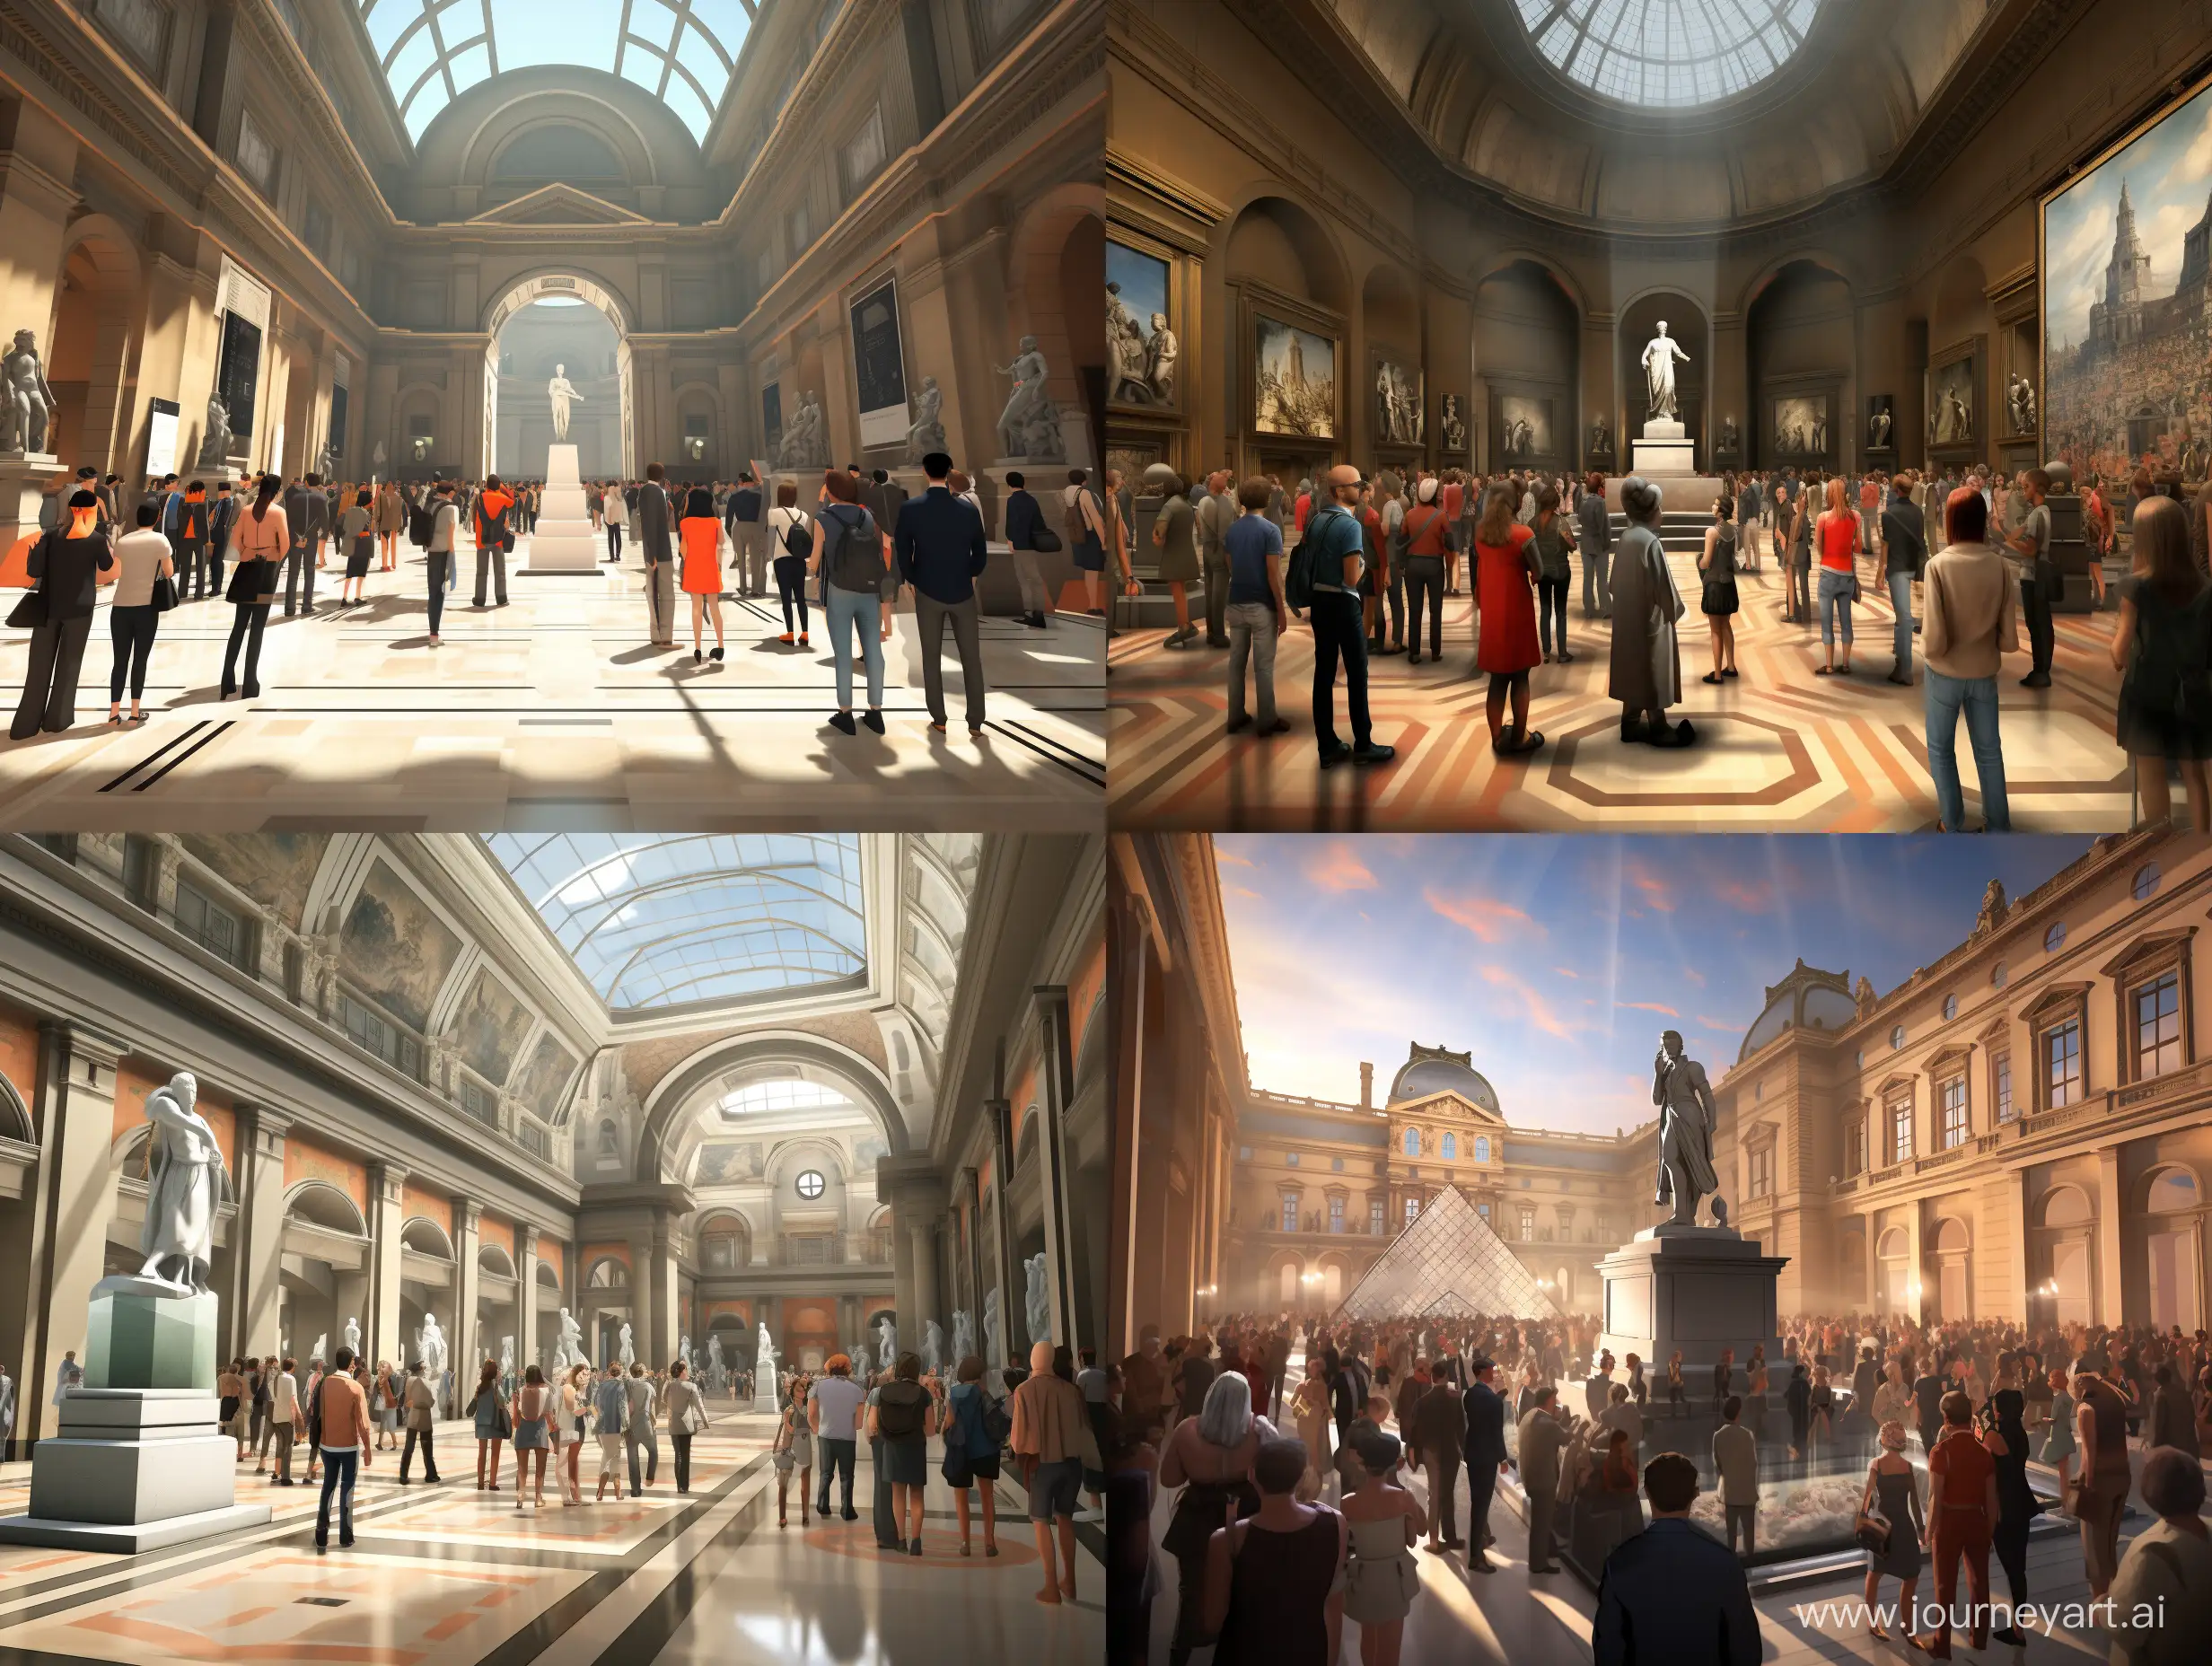 Crowded-Louvre-Museum-Tour-with-Enthusiastic-Guide